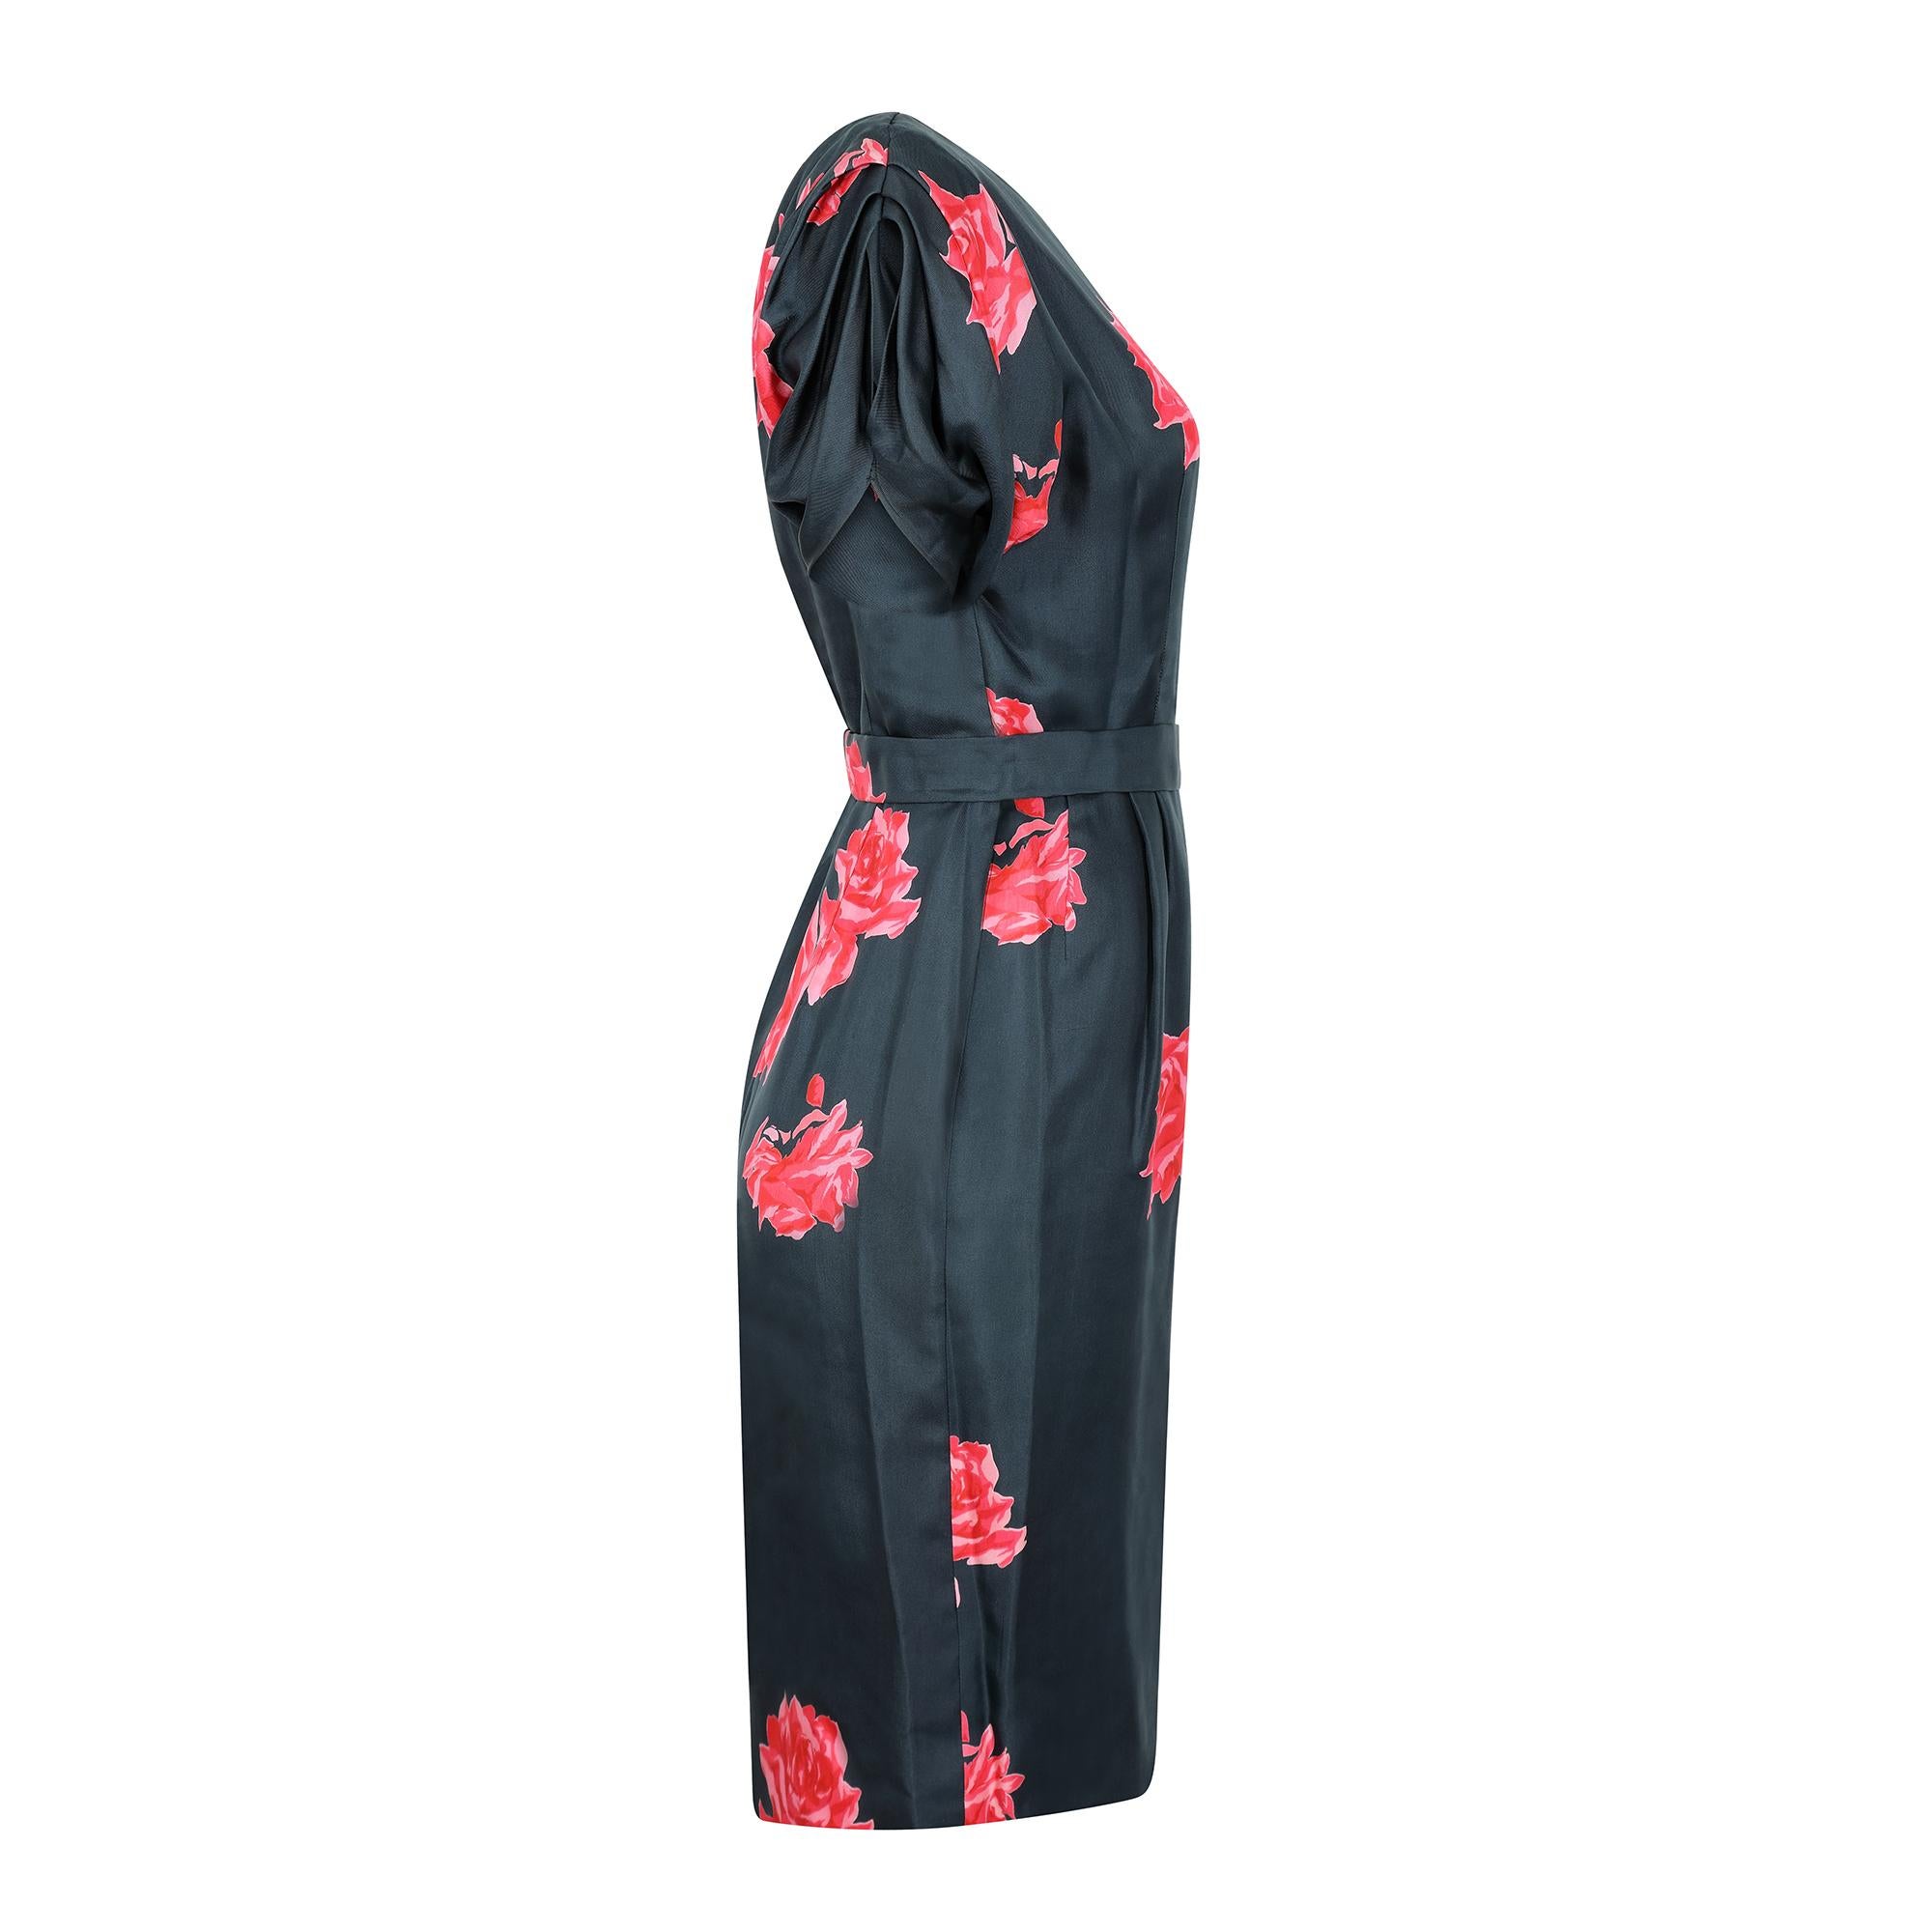 This is a really beautiful example of a late 50s or early 60s design in silk. The large rose print is a blend of pinks and reds which gives the print a painterly quality against the plain nazy background. The dress boasts the most beautiful